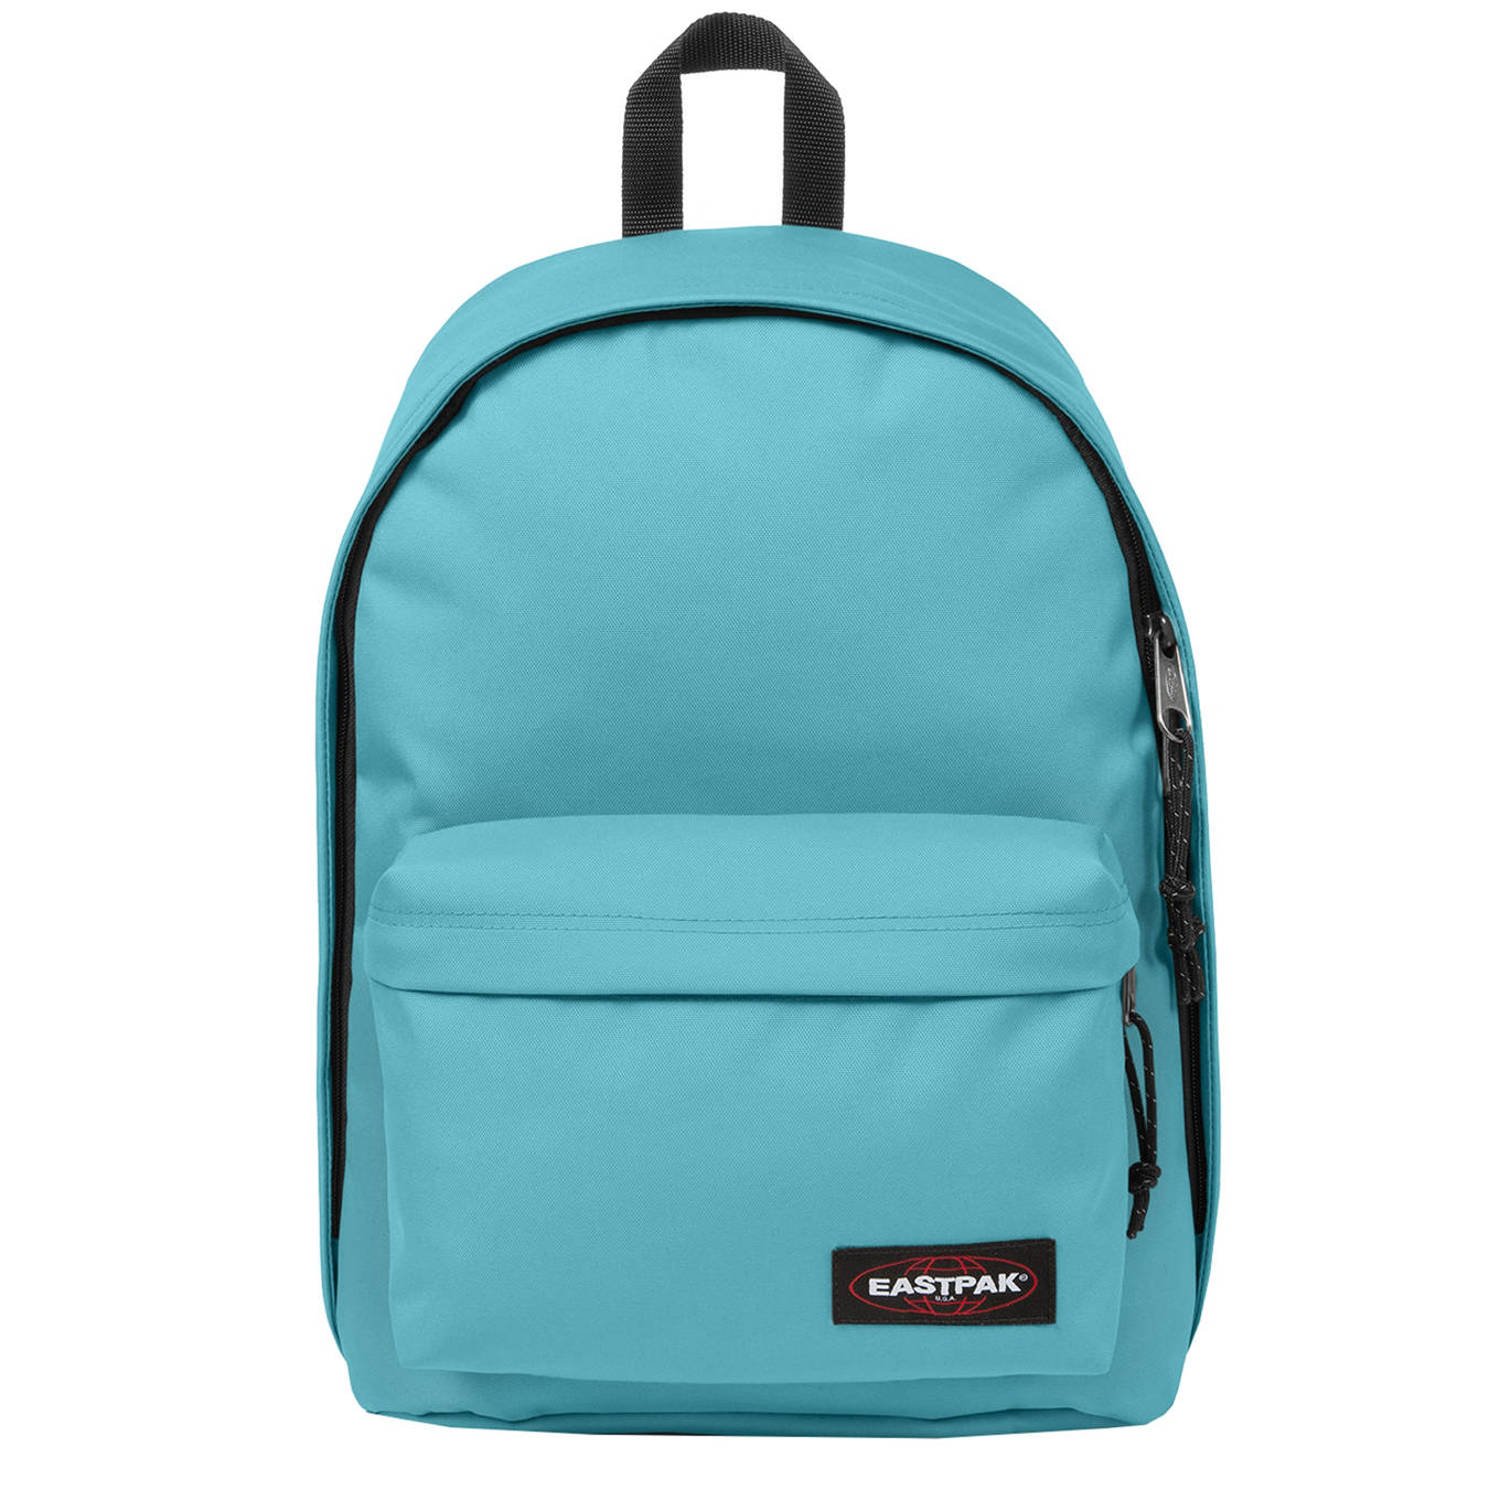 Eastpak rugzak Out of Office sea blue